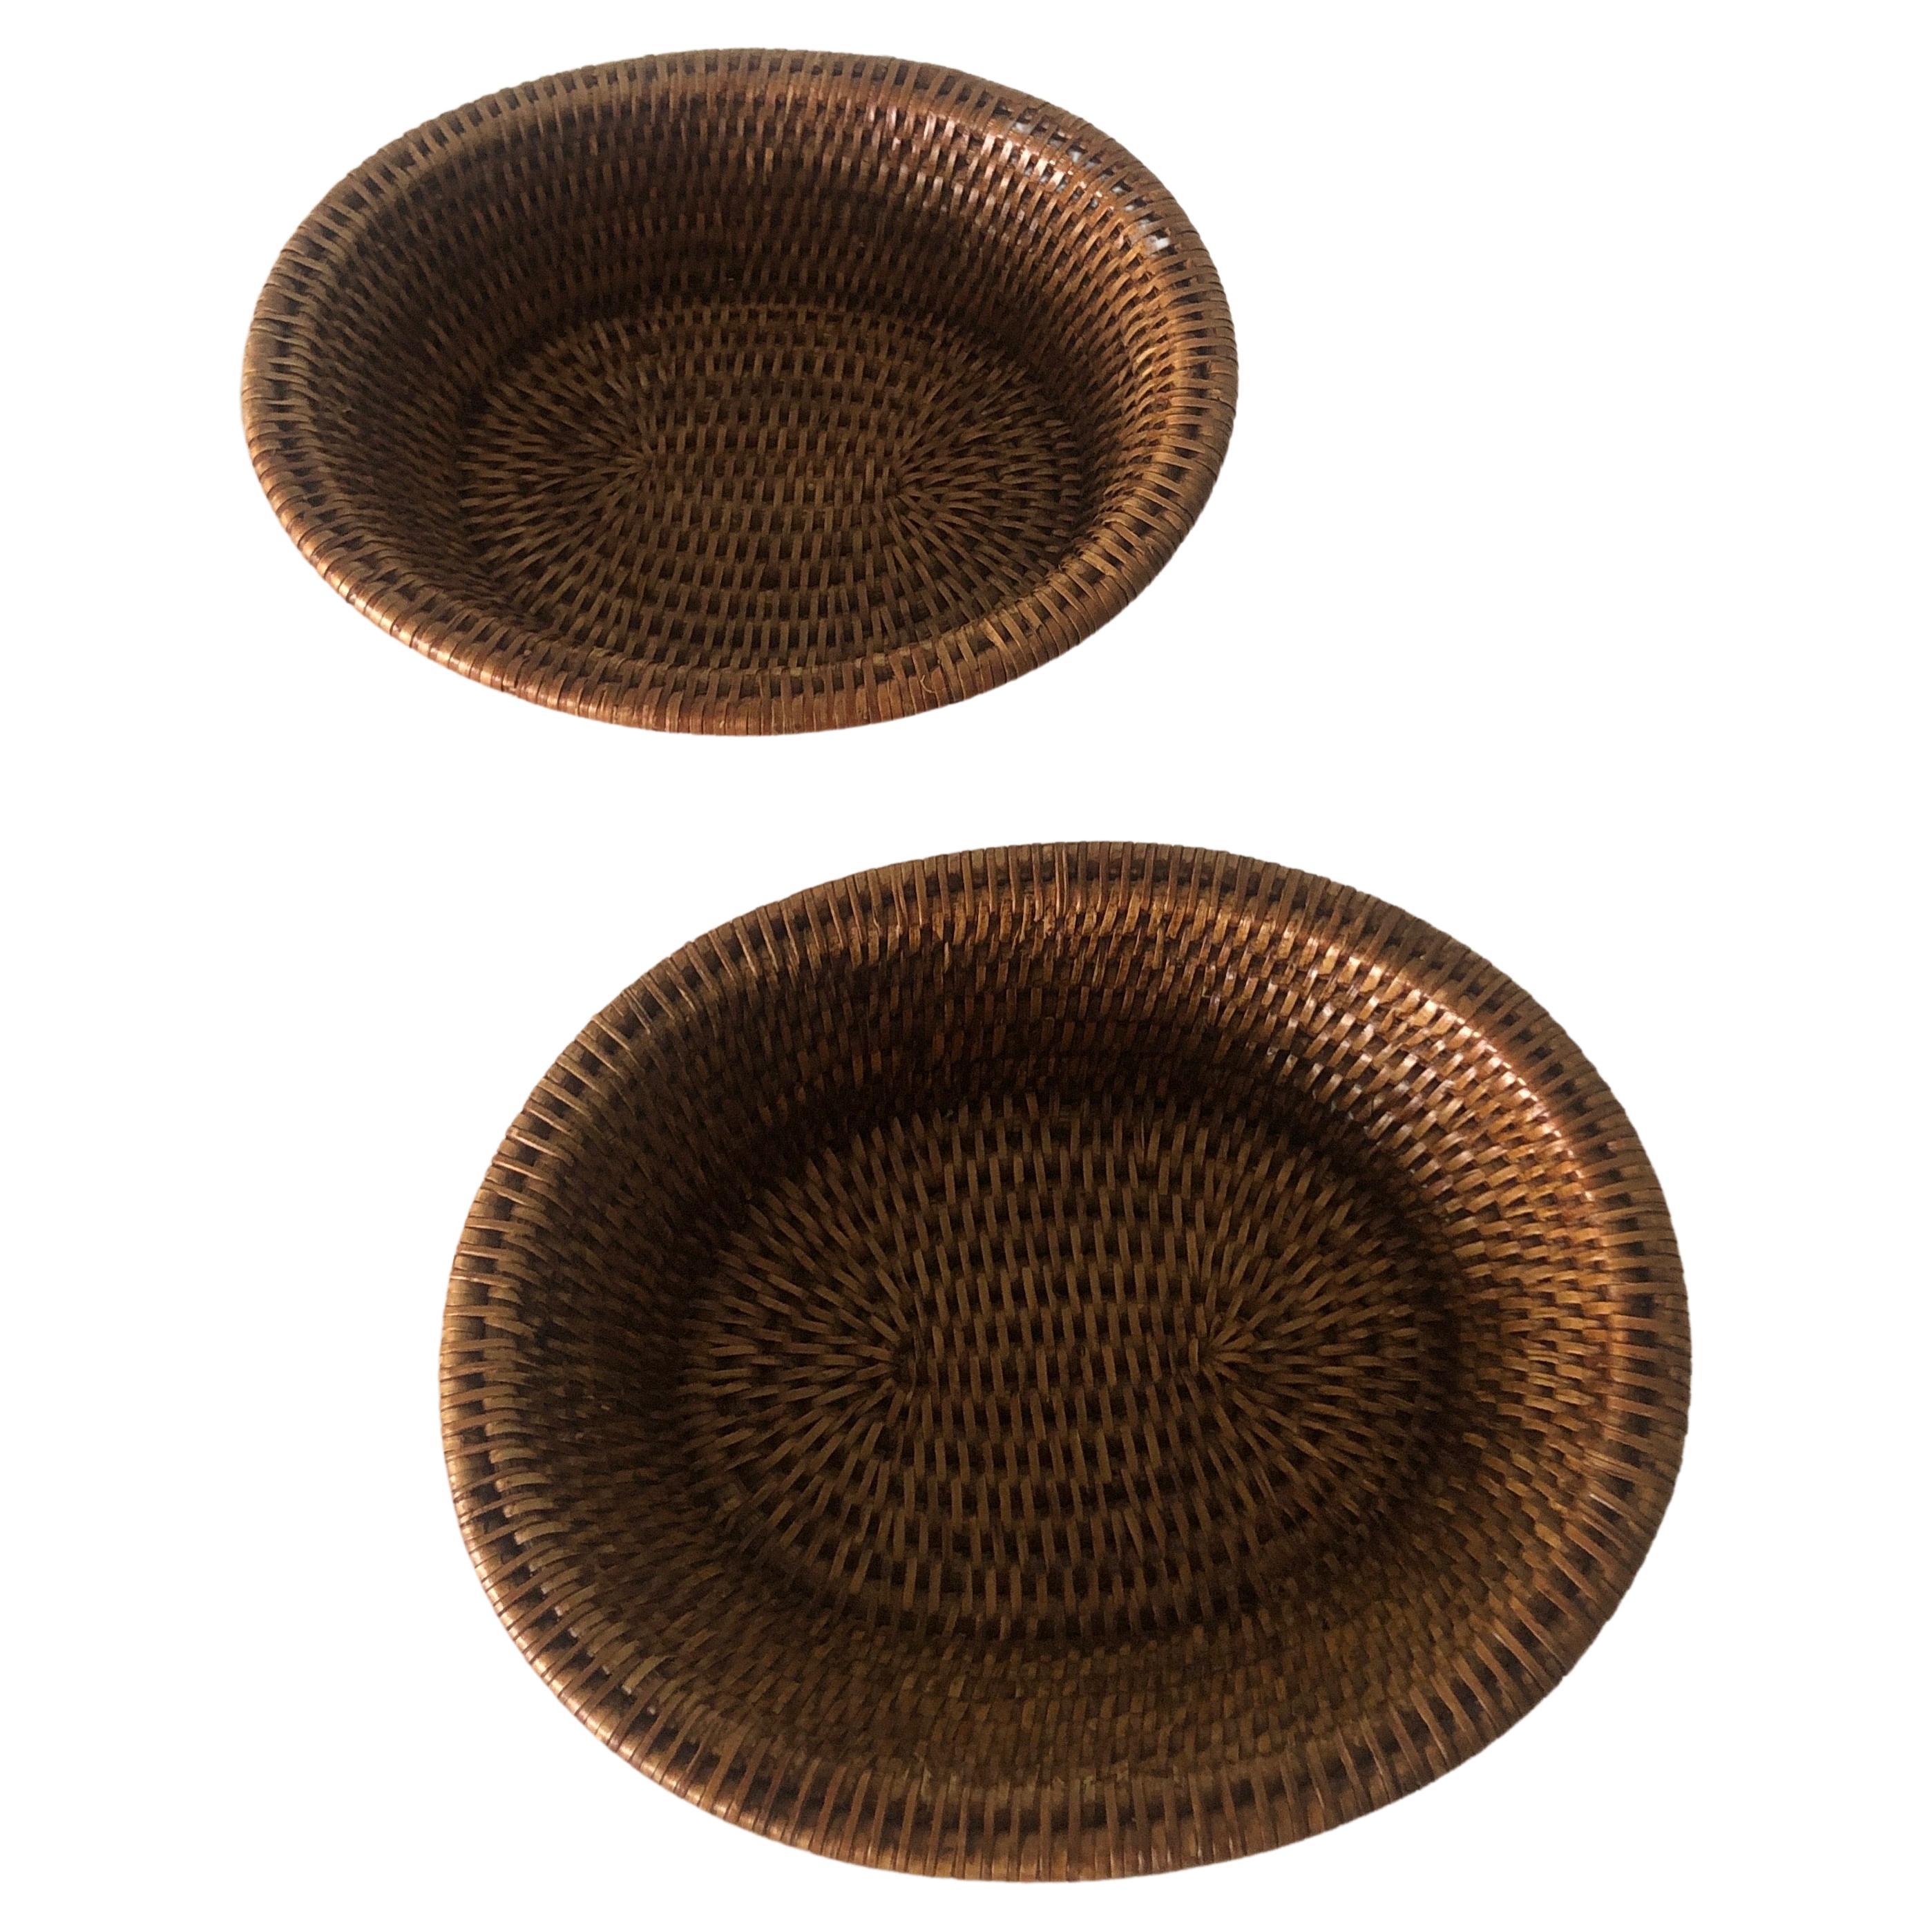 Set of '2' Woven Rattan Oval Baskets